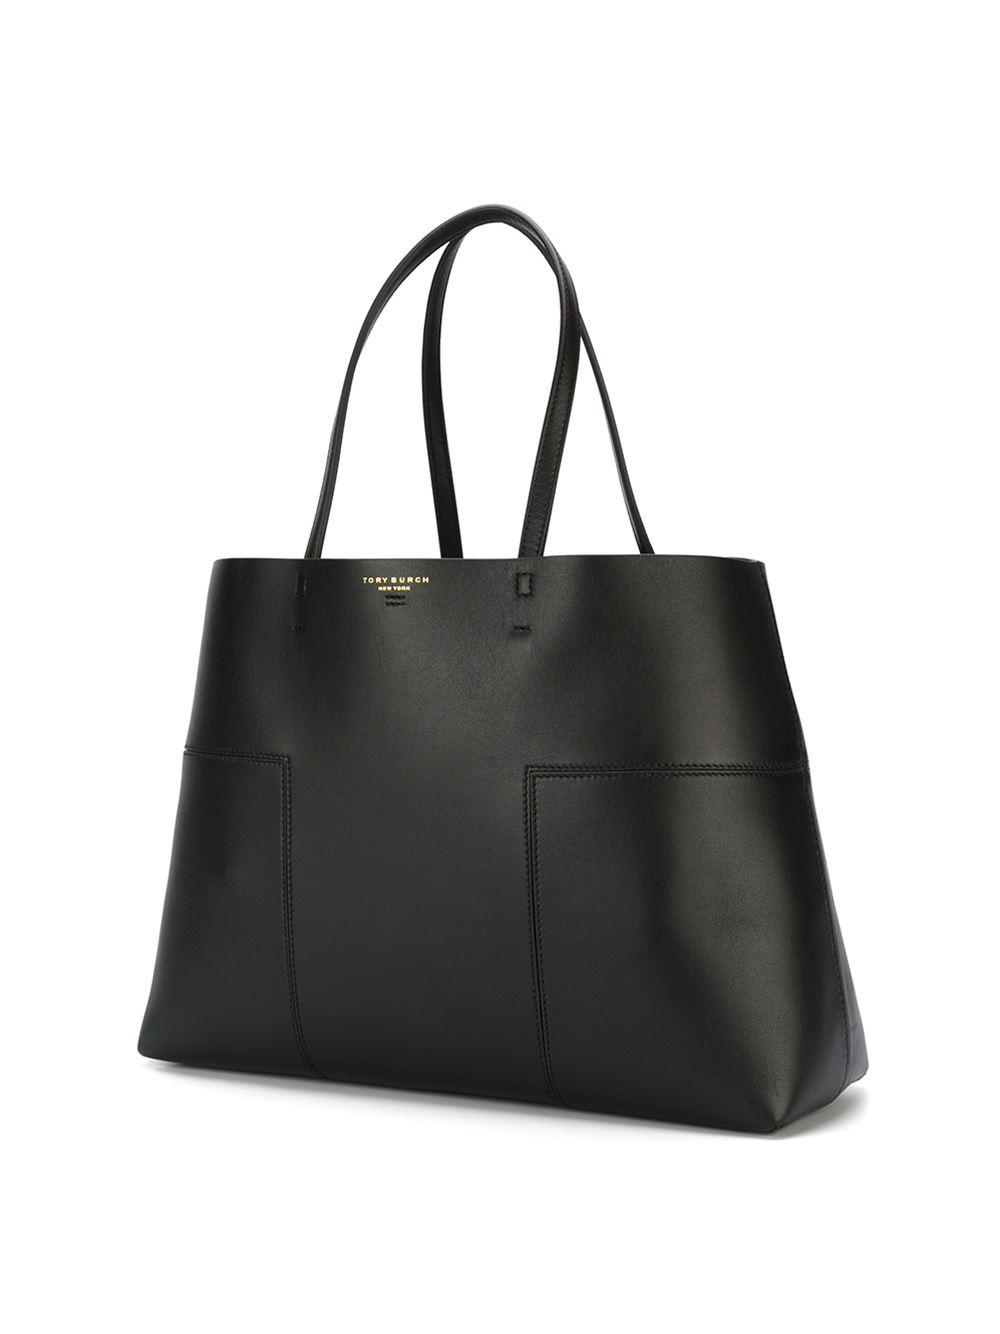 Tory burch Panelled Tote Bag in Black | Lyst